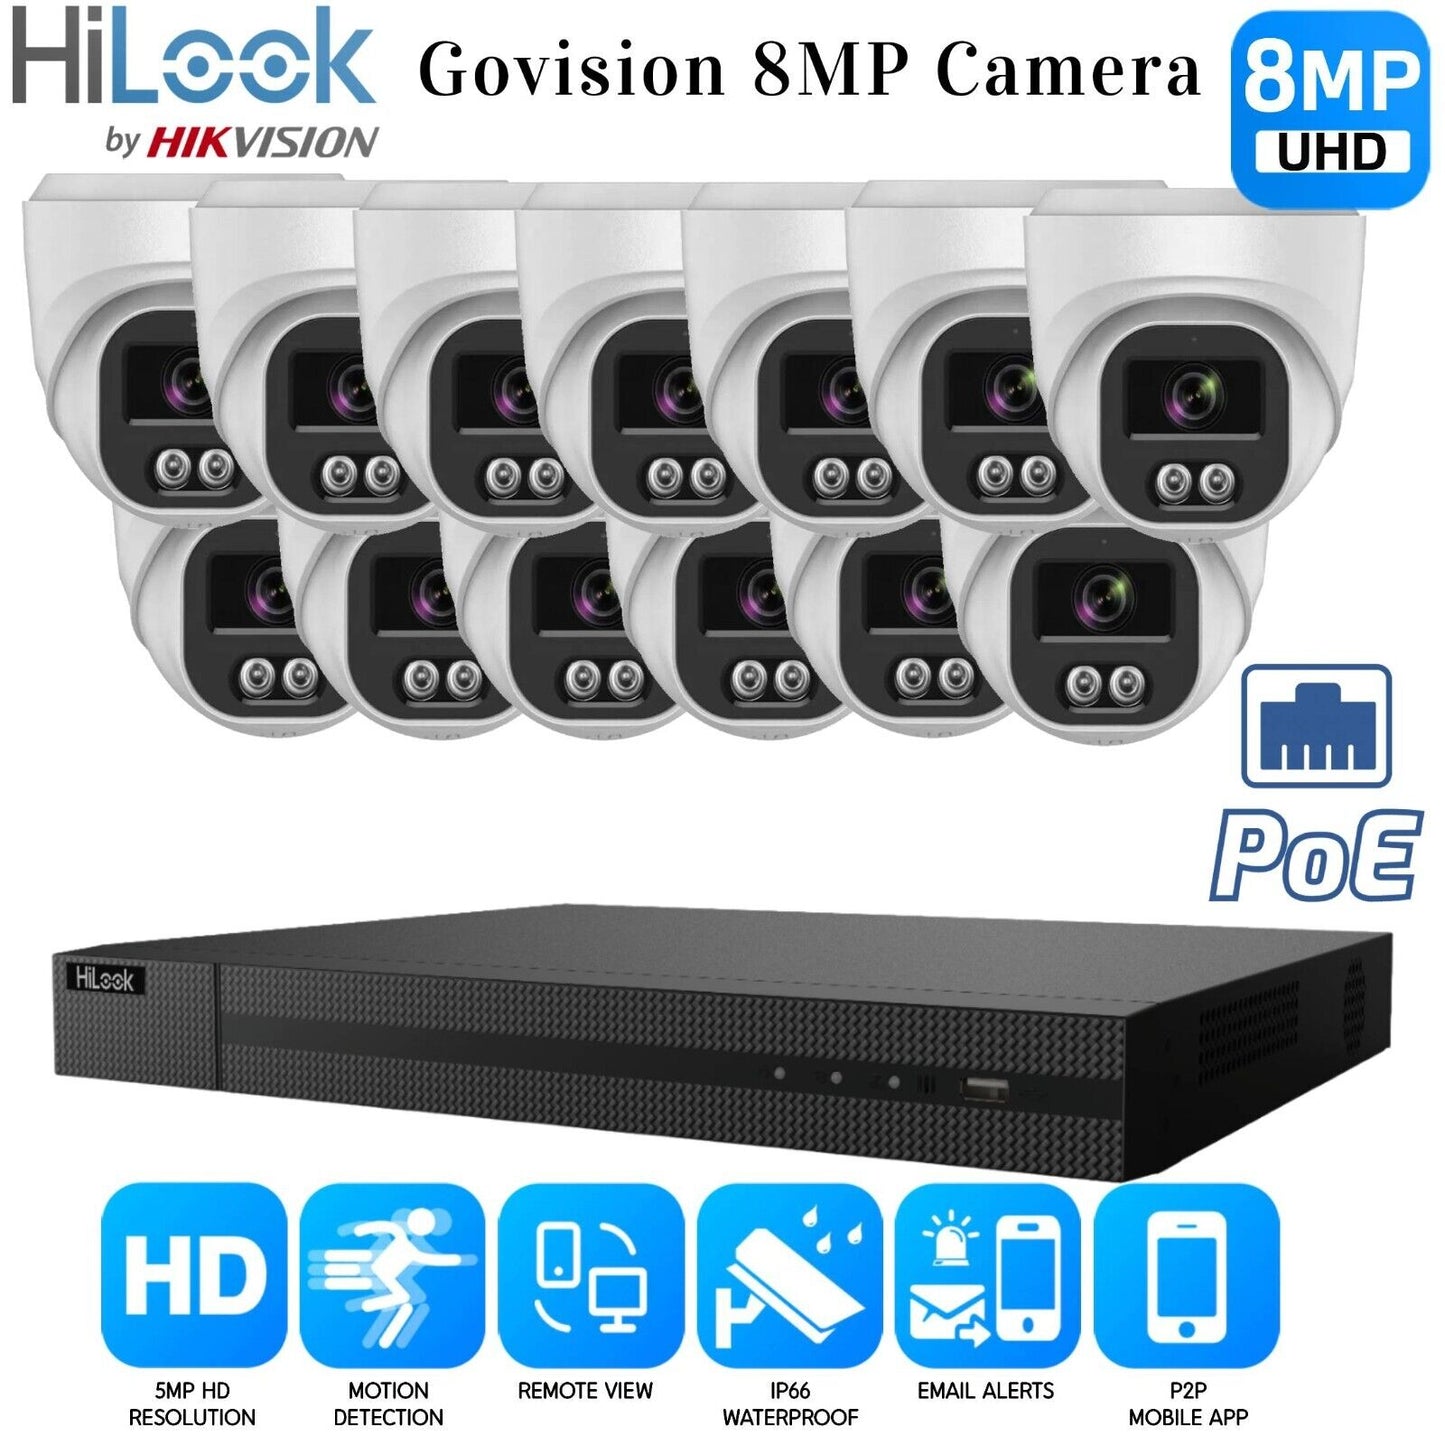 HIKVISION CCTV SYSTEM IP POE 8MP AUDIO MIC CAMERA SMART NIGHTVISION SECURITY KIT 16CH NVR 13x Cameras 1TB HDD